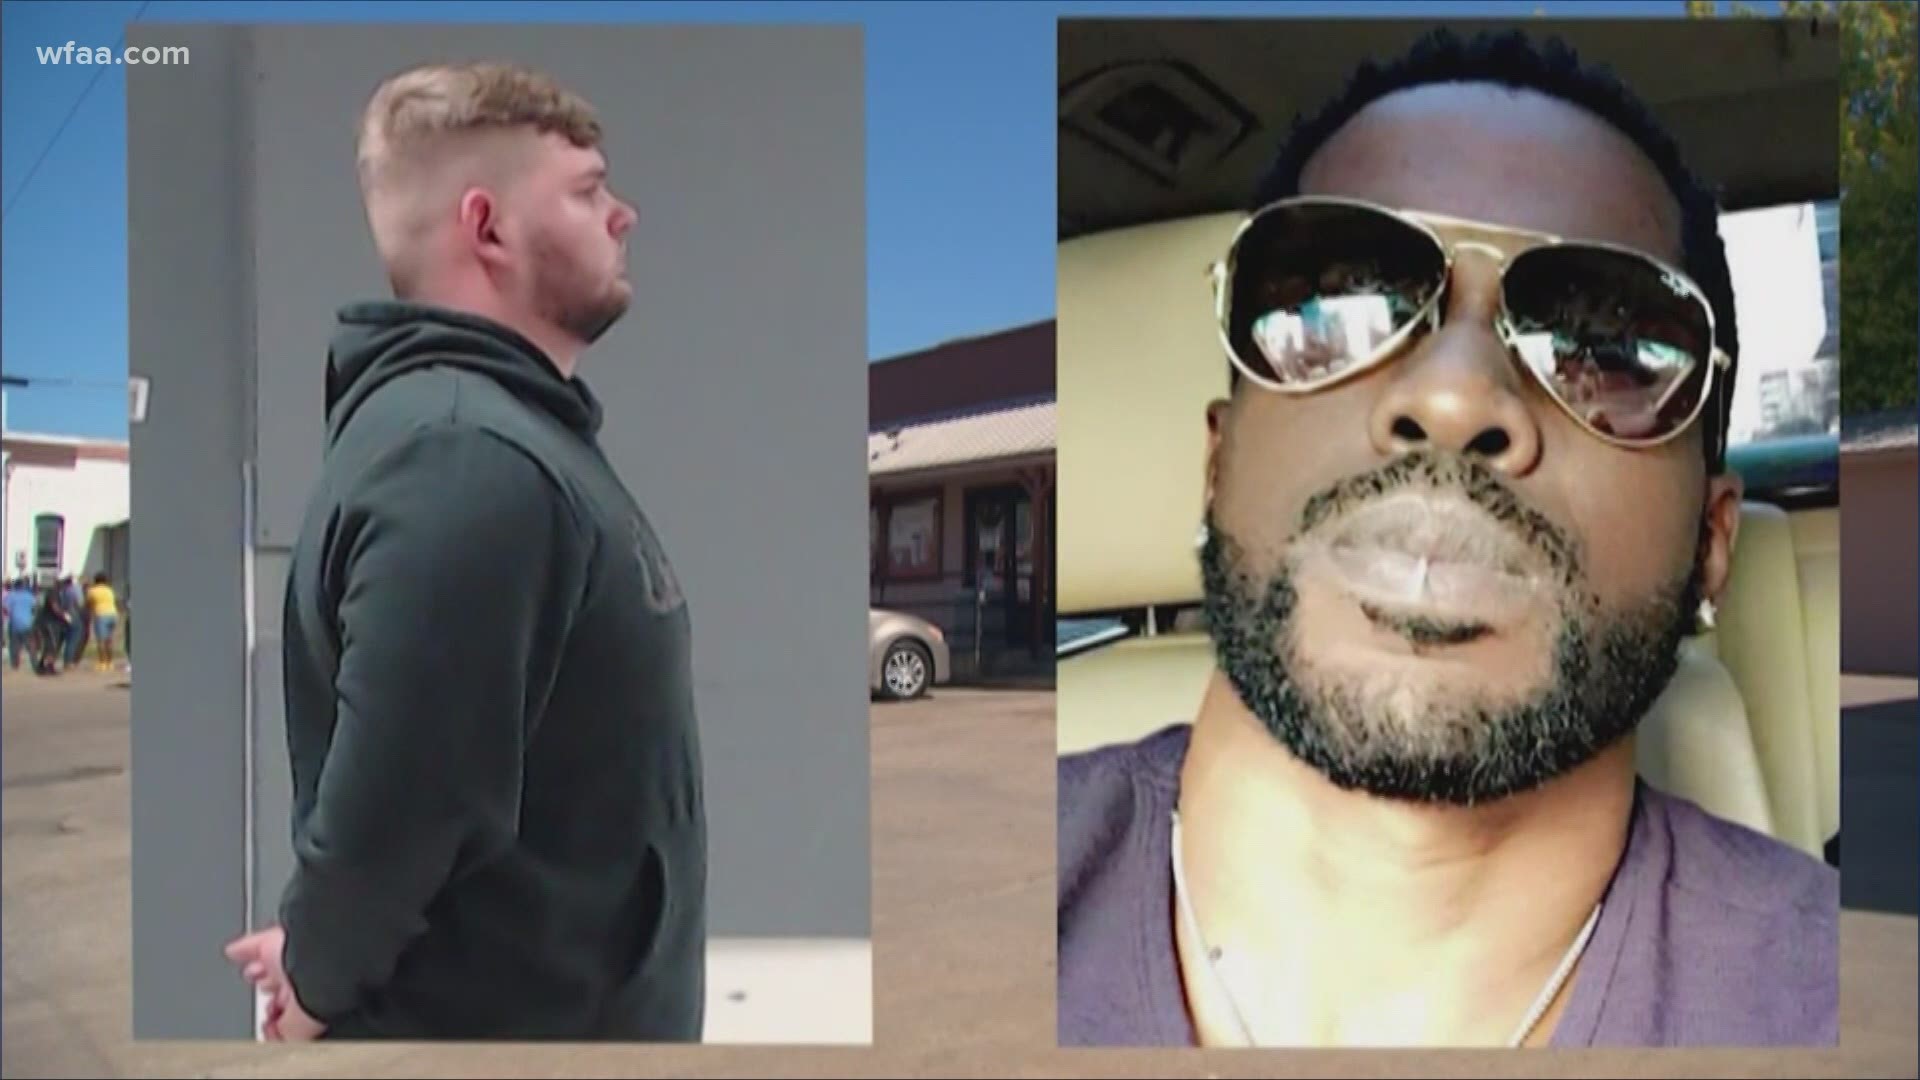 A probable cause affidavit released by the Texas Rangers provided more details in the interaction between Wolfe City Officer Shaun Lucas and Jonathan Price